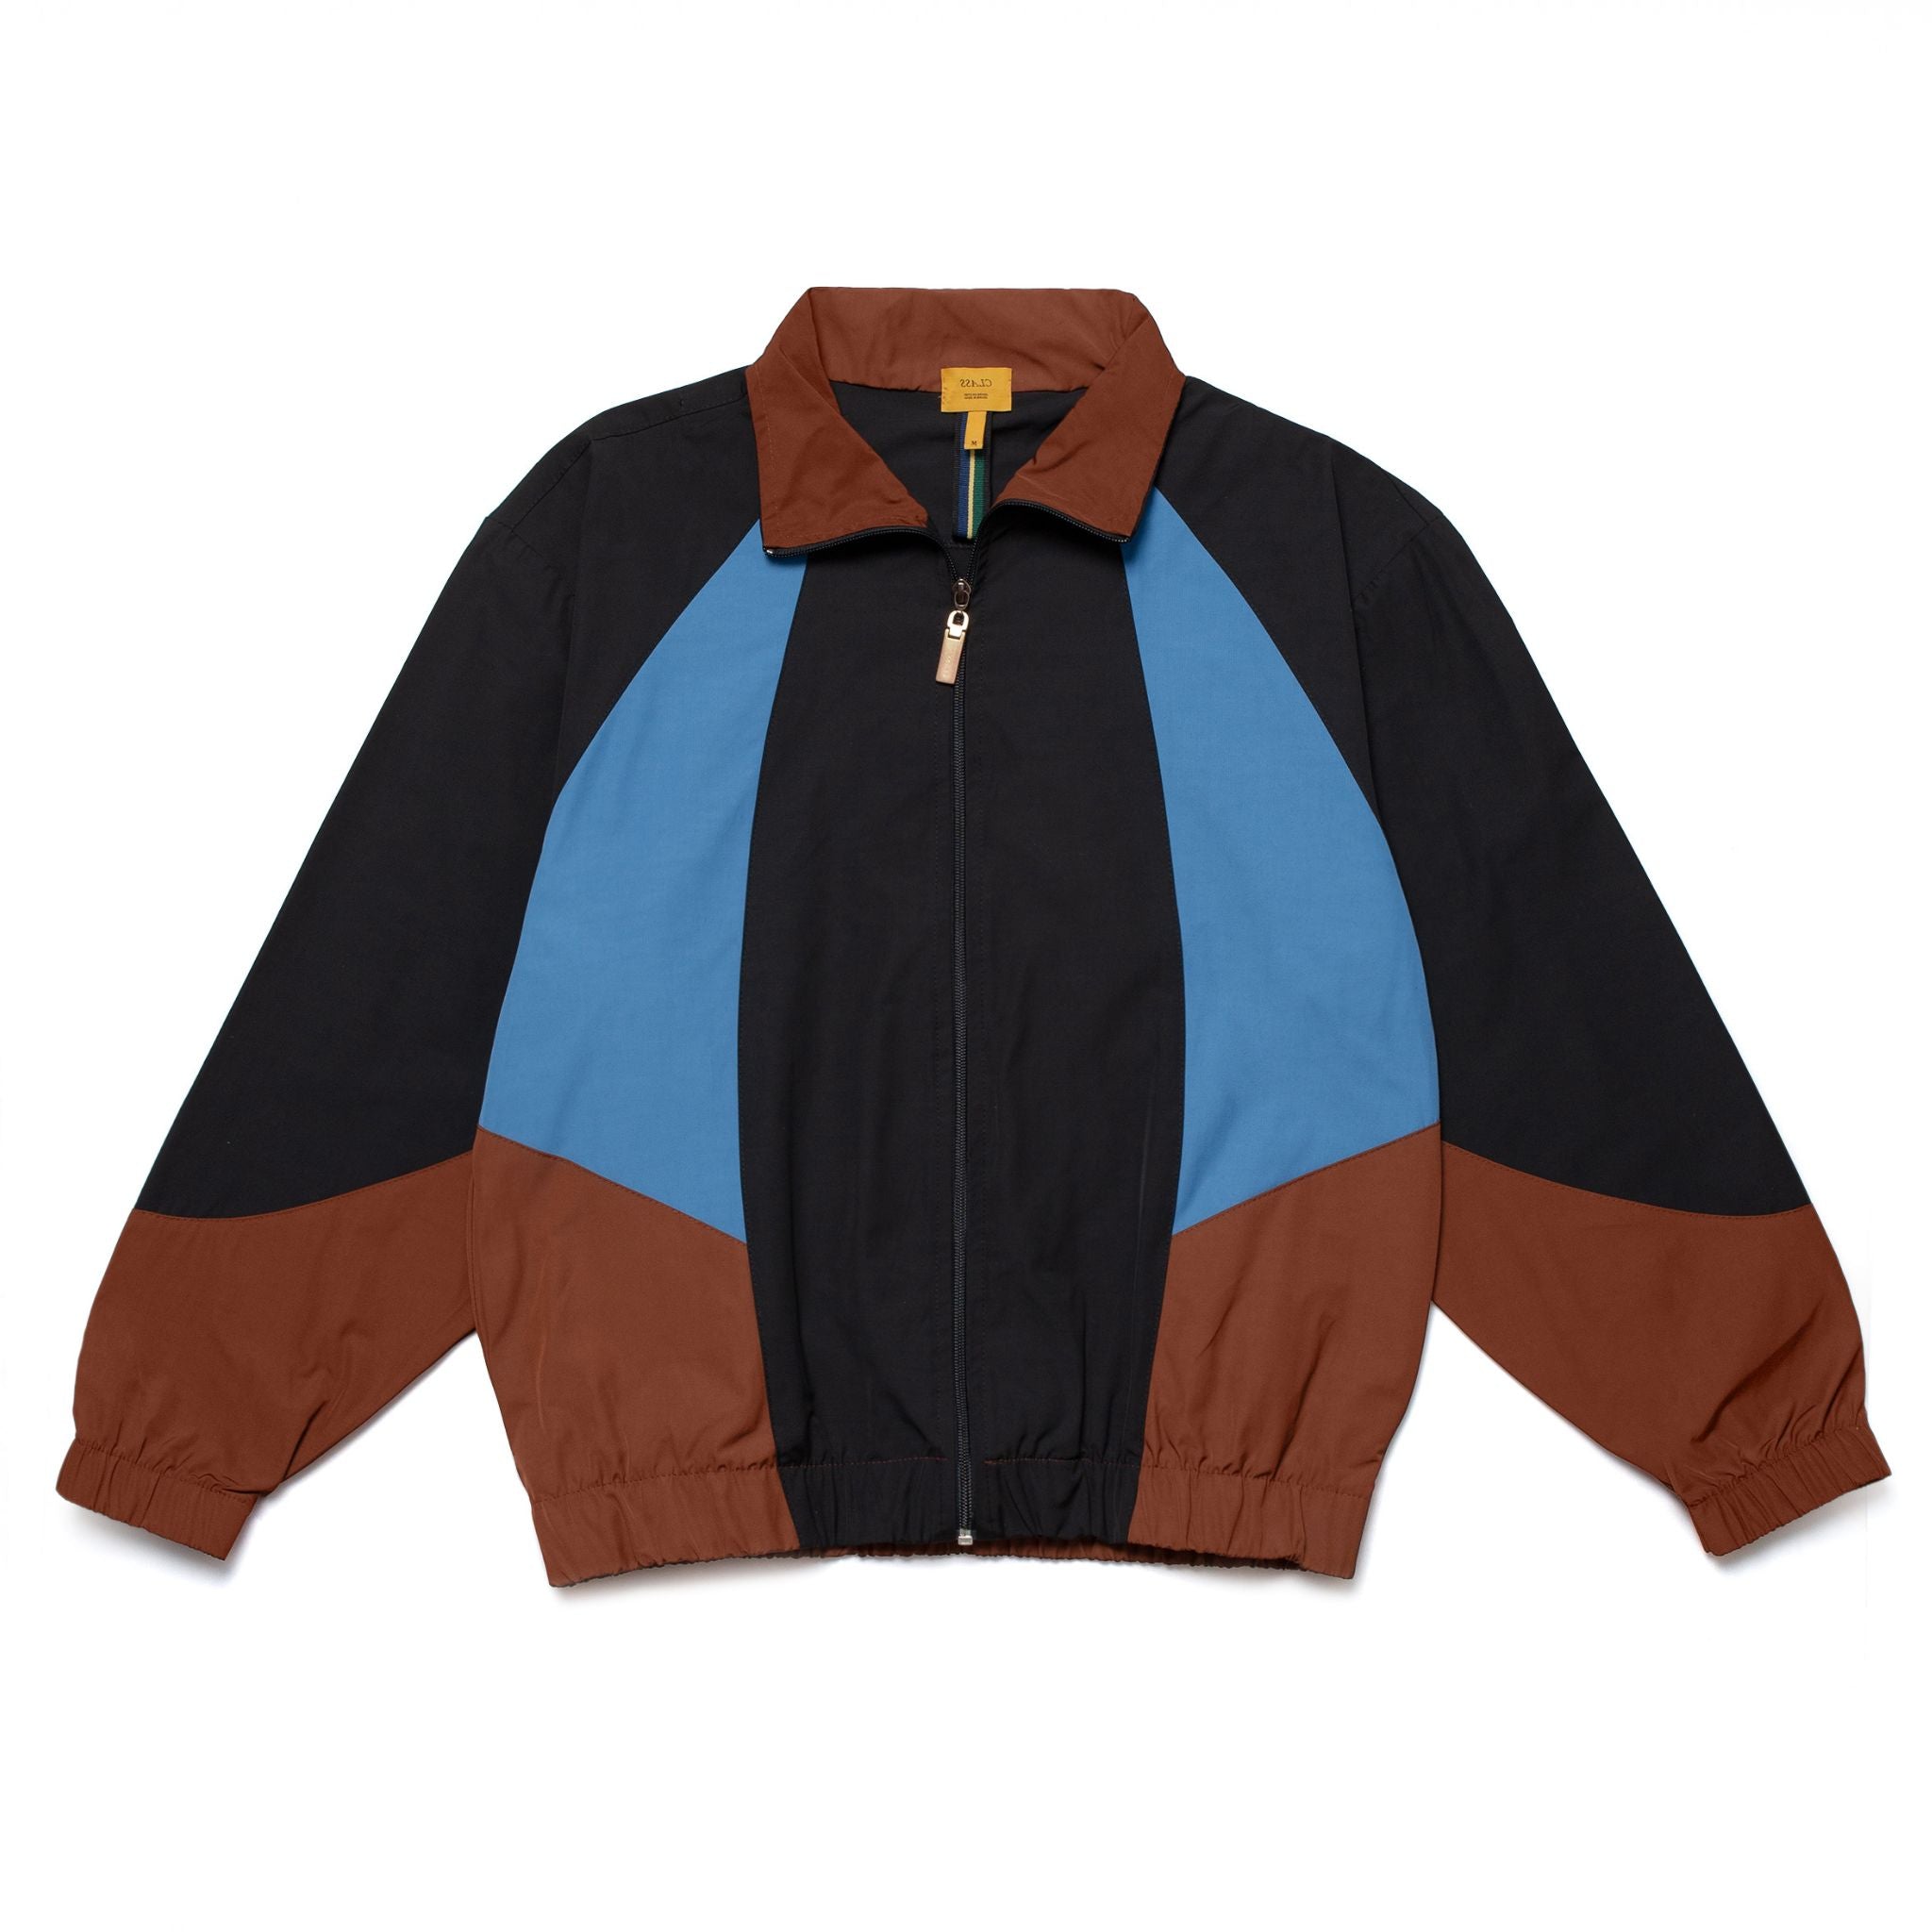 CLASS - Jacket Powell "Black&Brown" - THE GAME